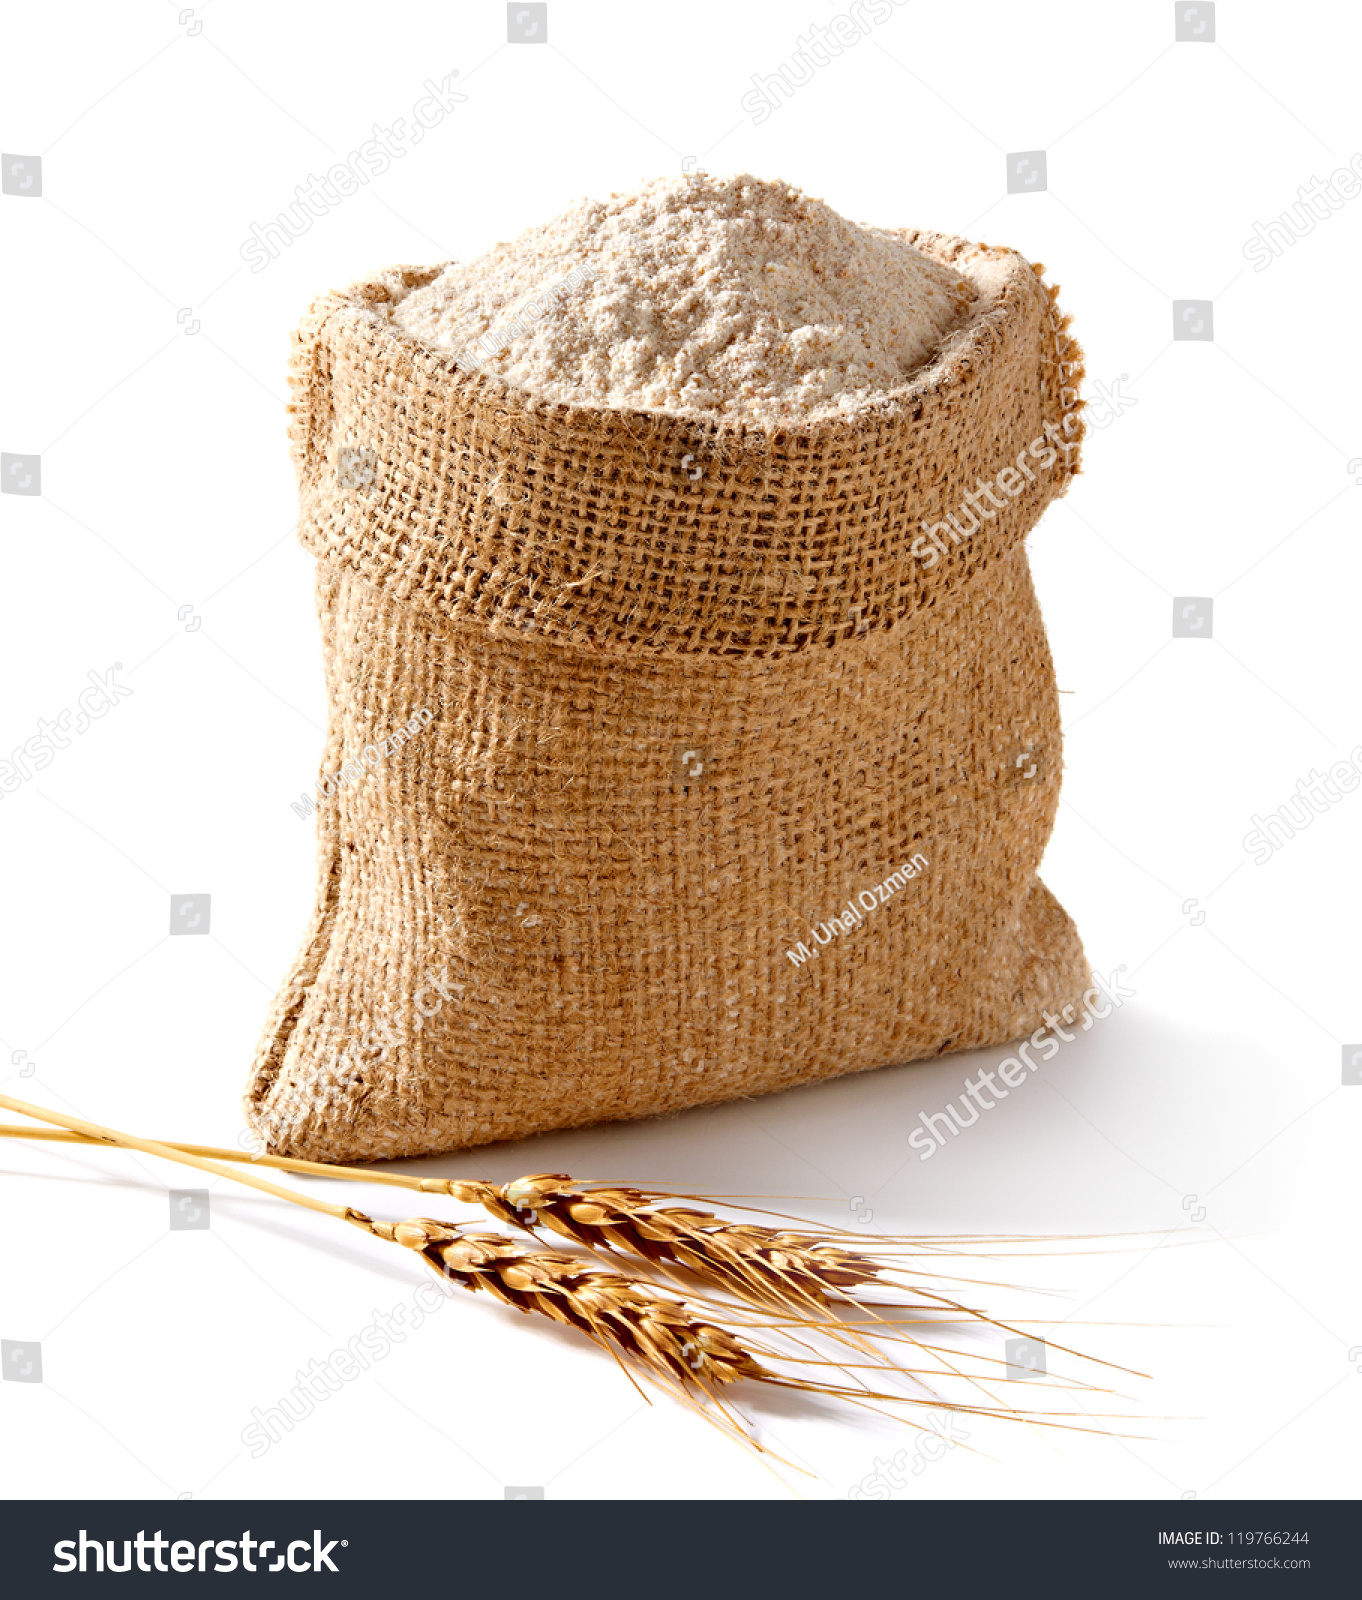 Download Whole Flour Bag Wheat Ears Miscellaneous Stock Image 119766244 Yellowimages Mockups